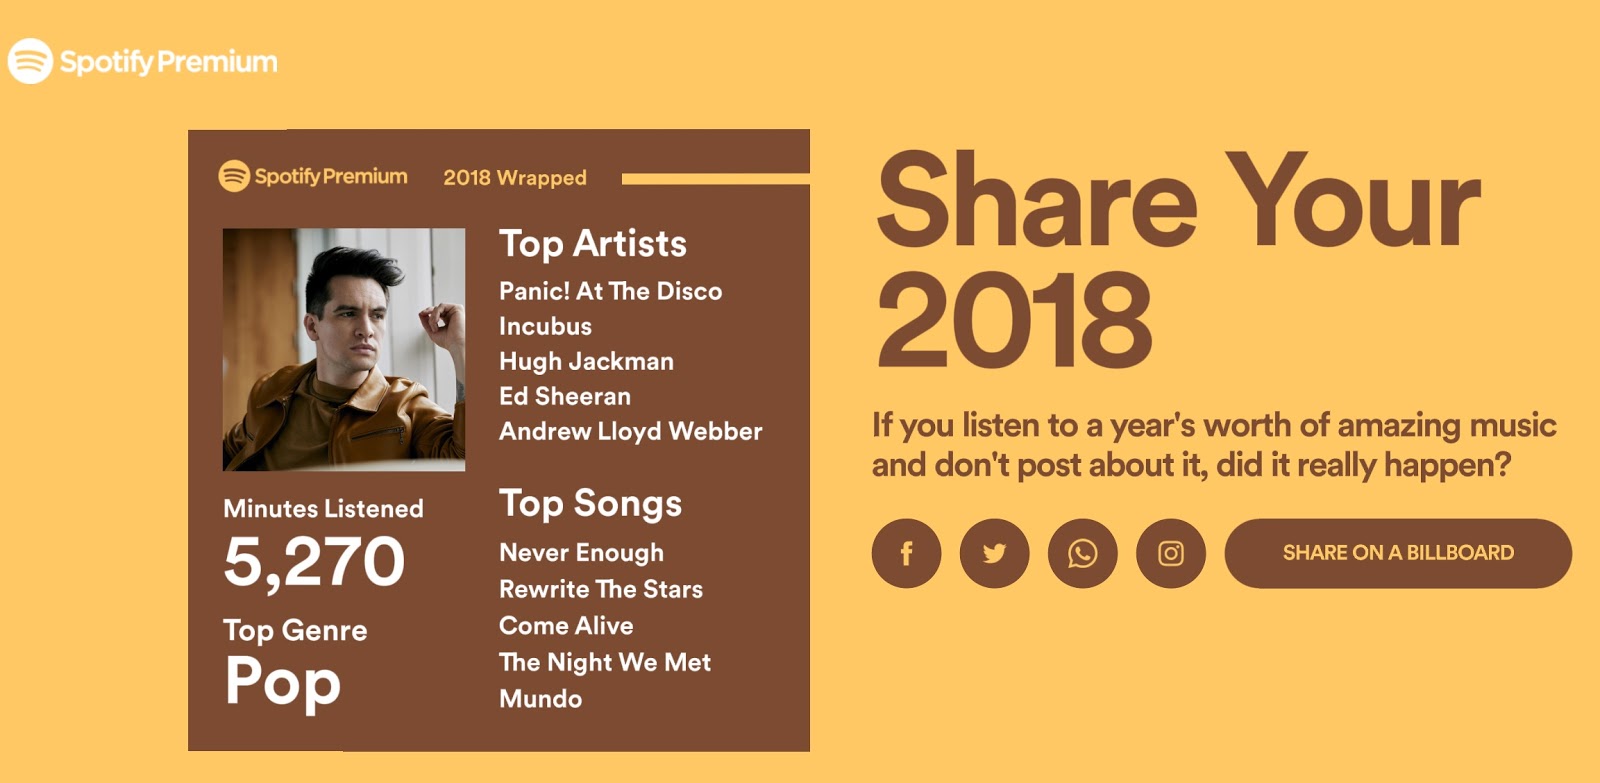 Wonder Woman Rises Spotify Wrapped Which Songs Shaped Your 2018